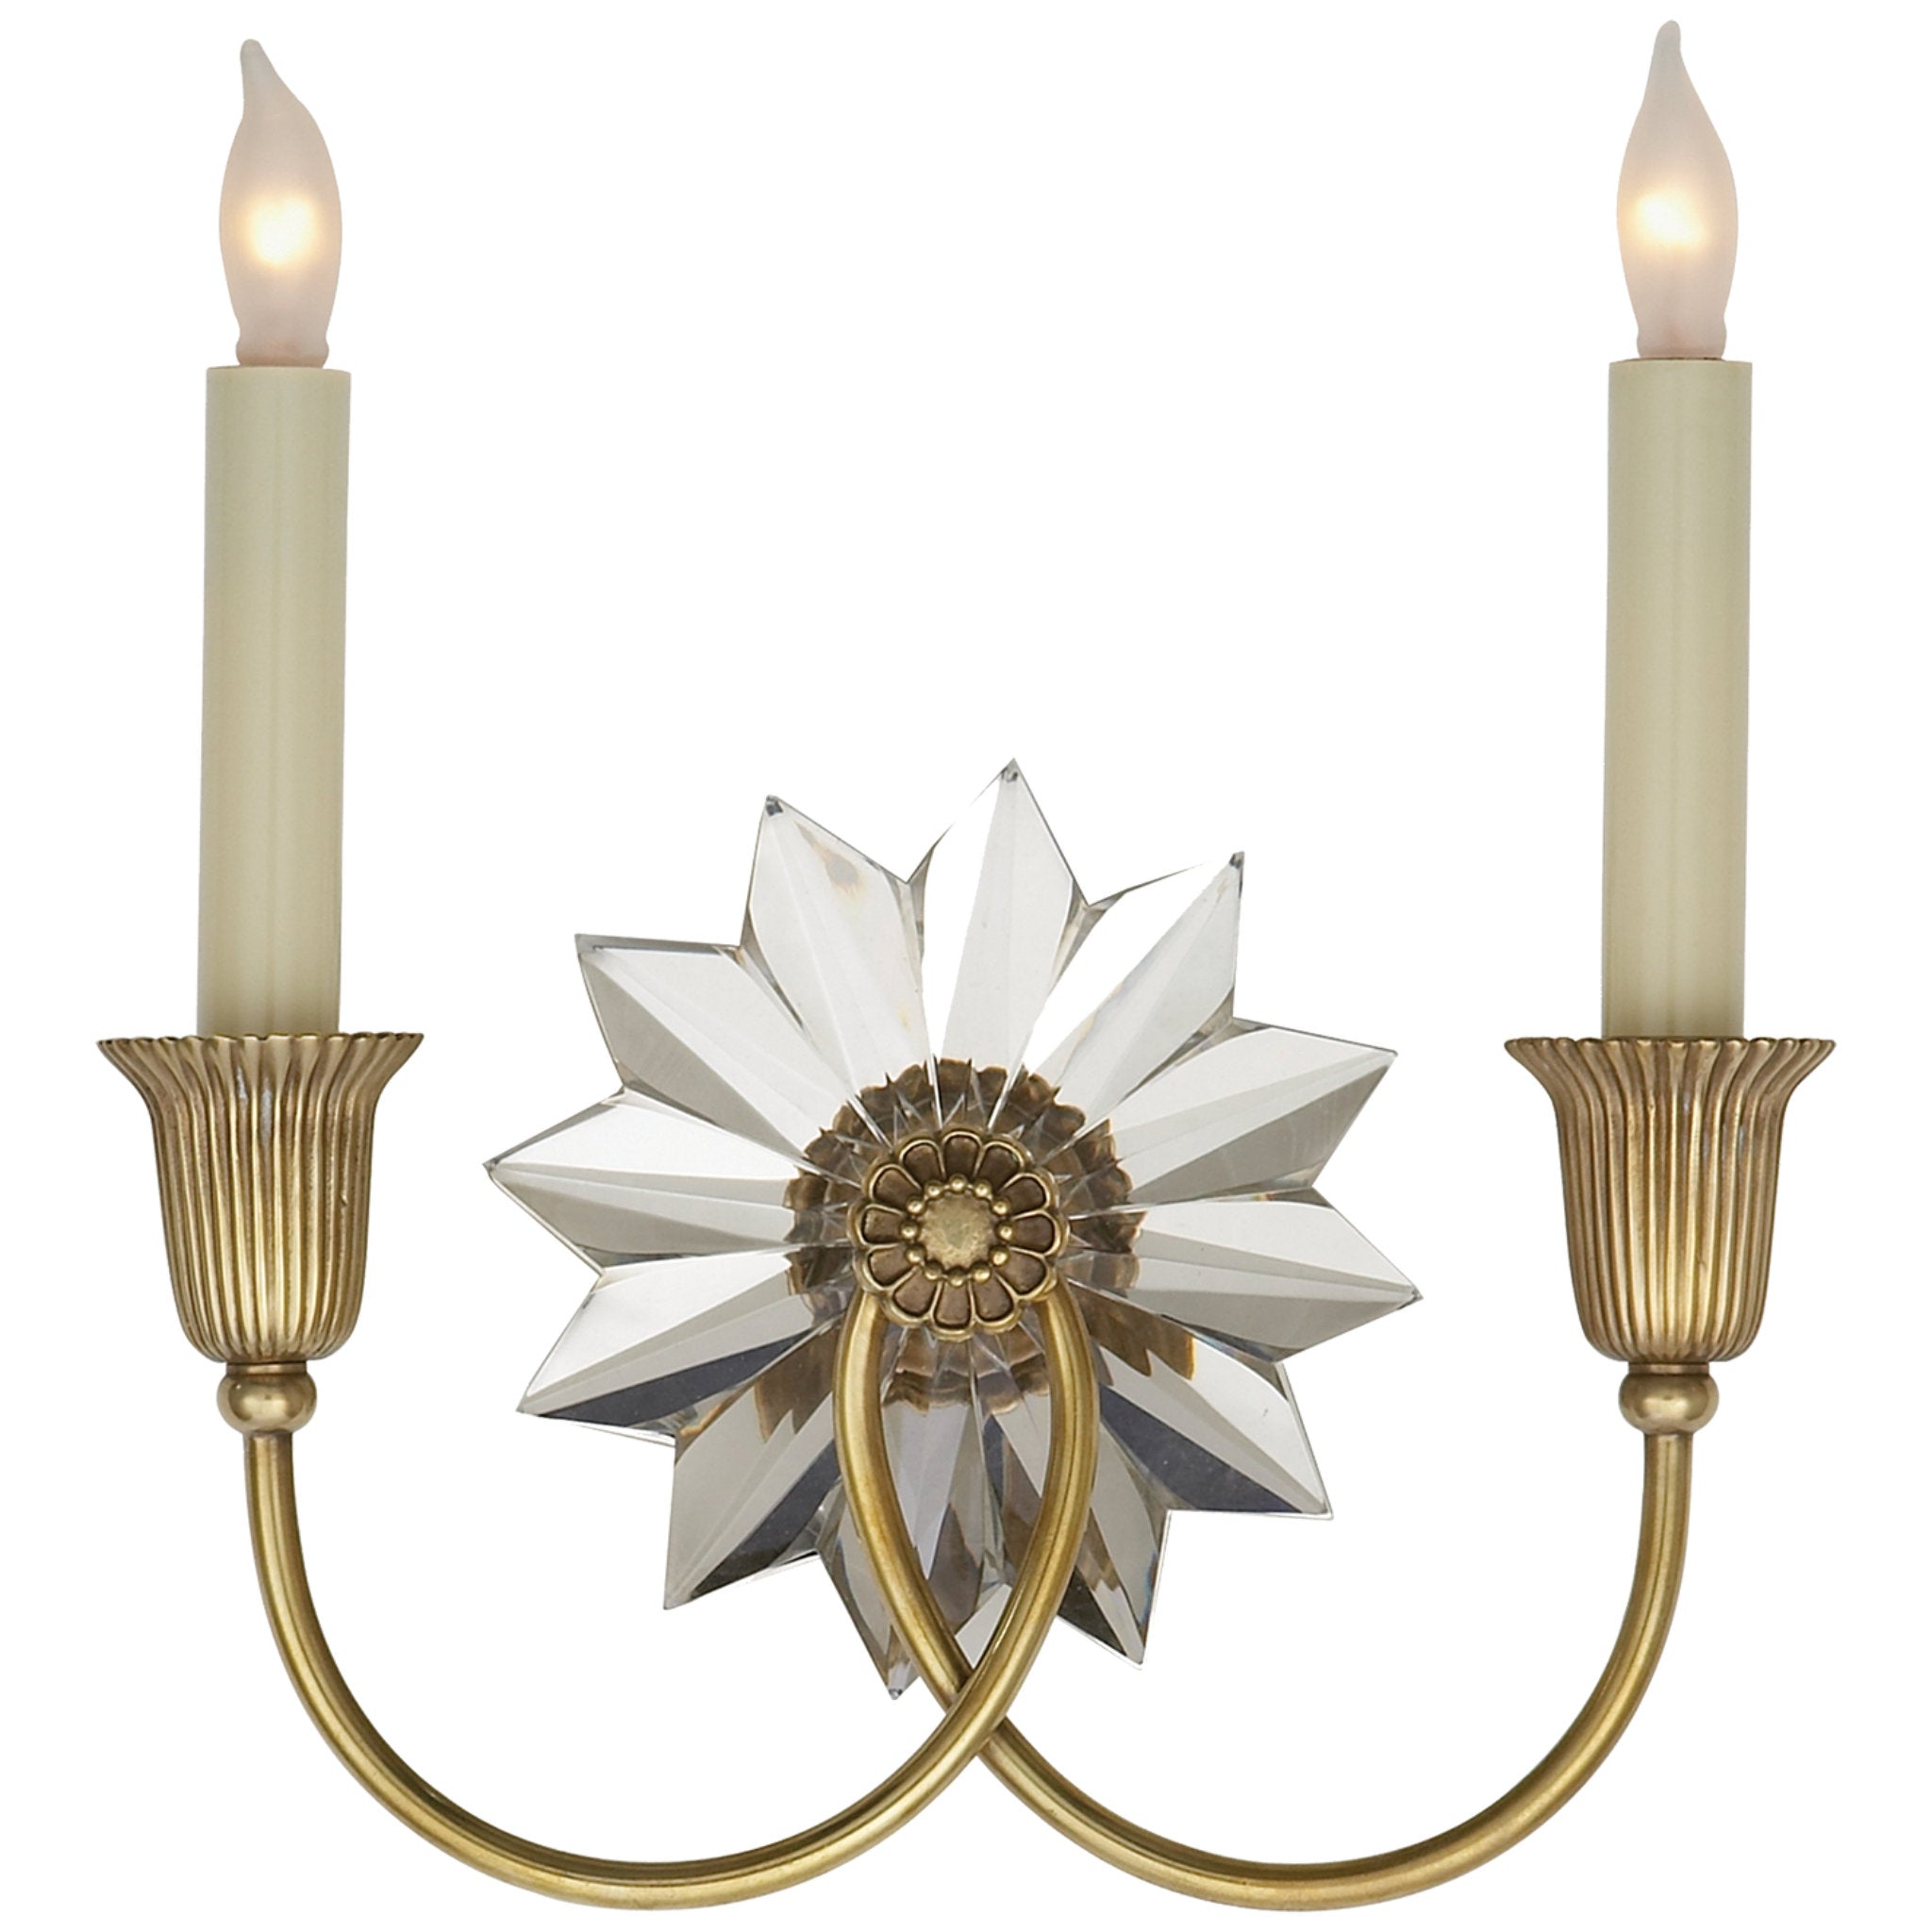 J. Randall Powers Huntingdon Double Sconce in Hand-Rubbed Antique Brass and Crystal